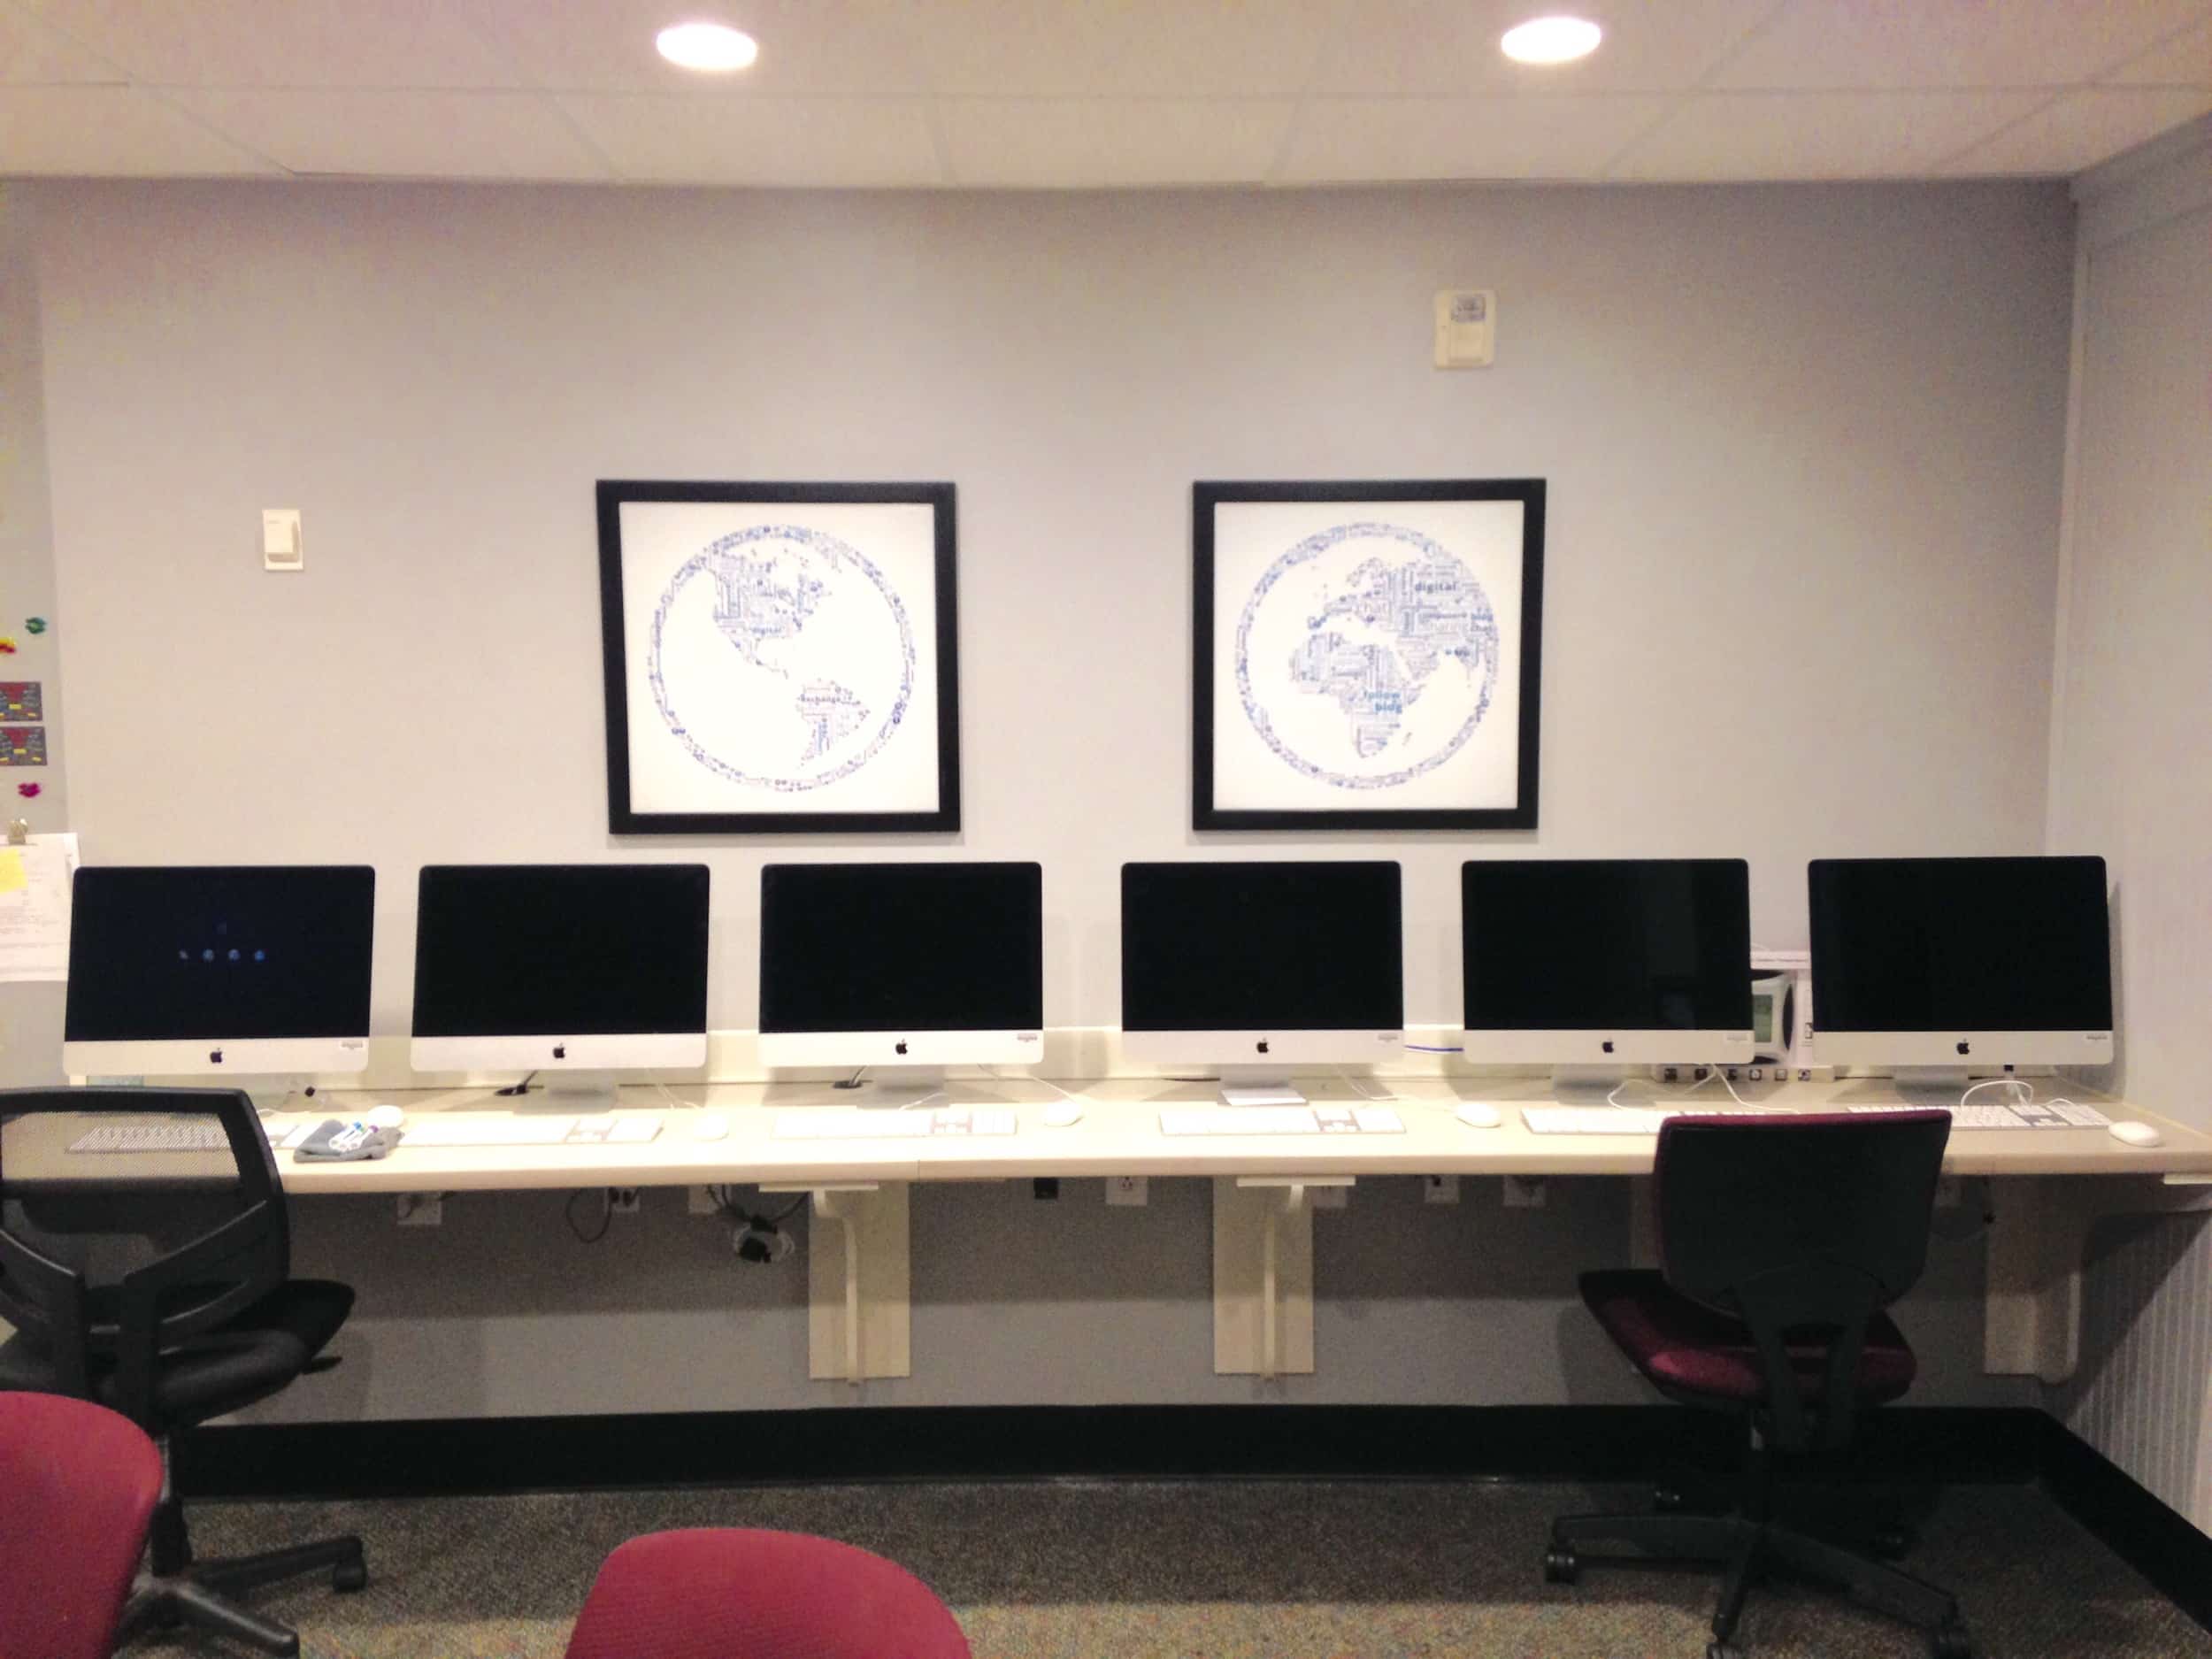 The digital media center is clean, modern and fully equipped with Macintosh desktop computers. The two pieces of wall art each contain a hidden NGU logo. See if you can find them next time you are in the Mass Communication department.&nbsp;